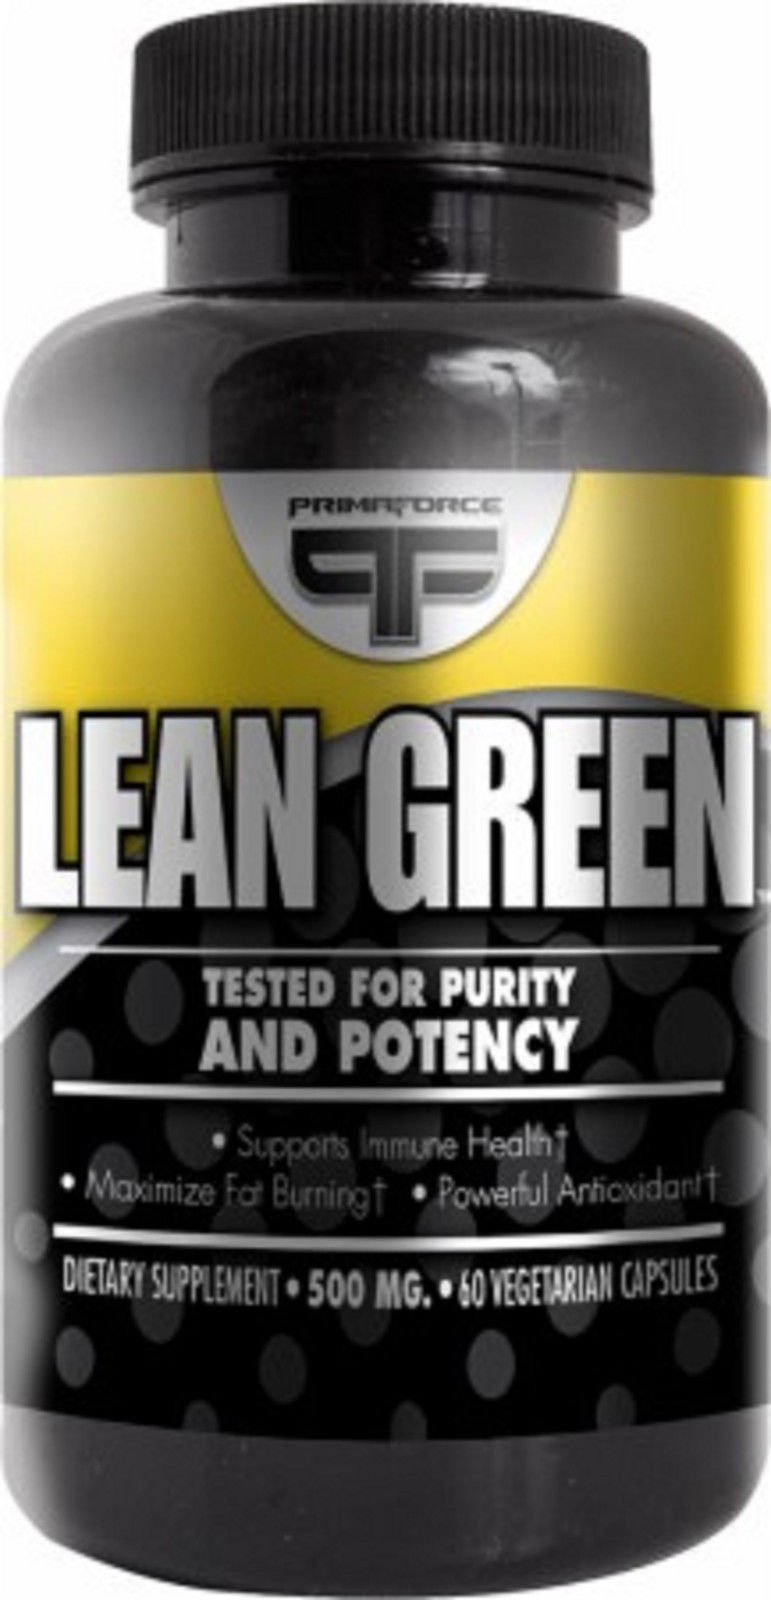 Lean Green, 60 pcs, PrimaForce. Special supplements. 